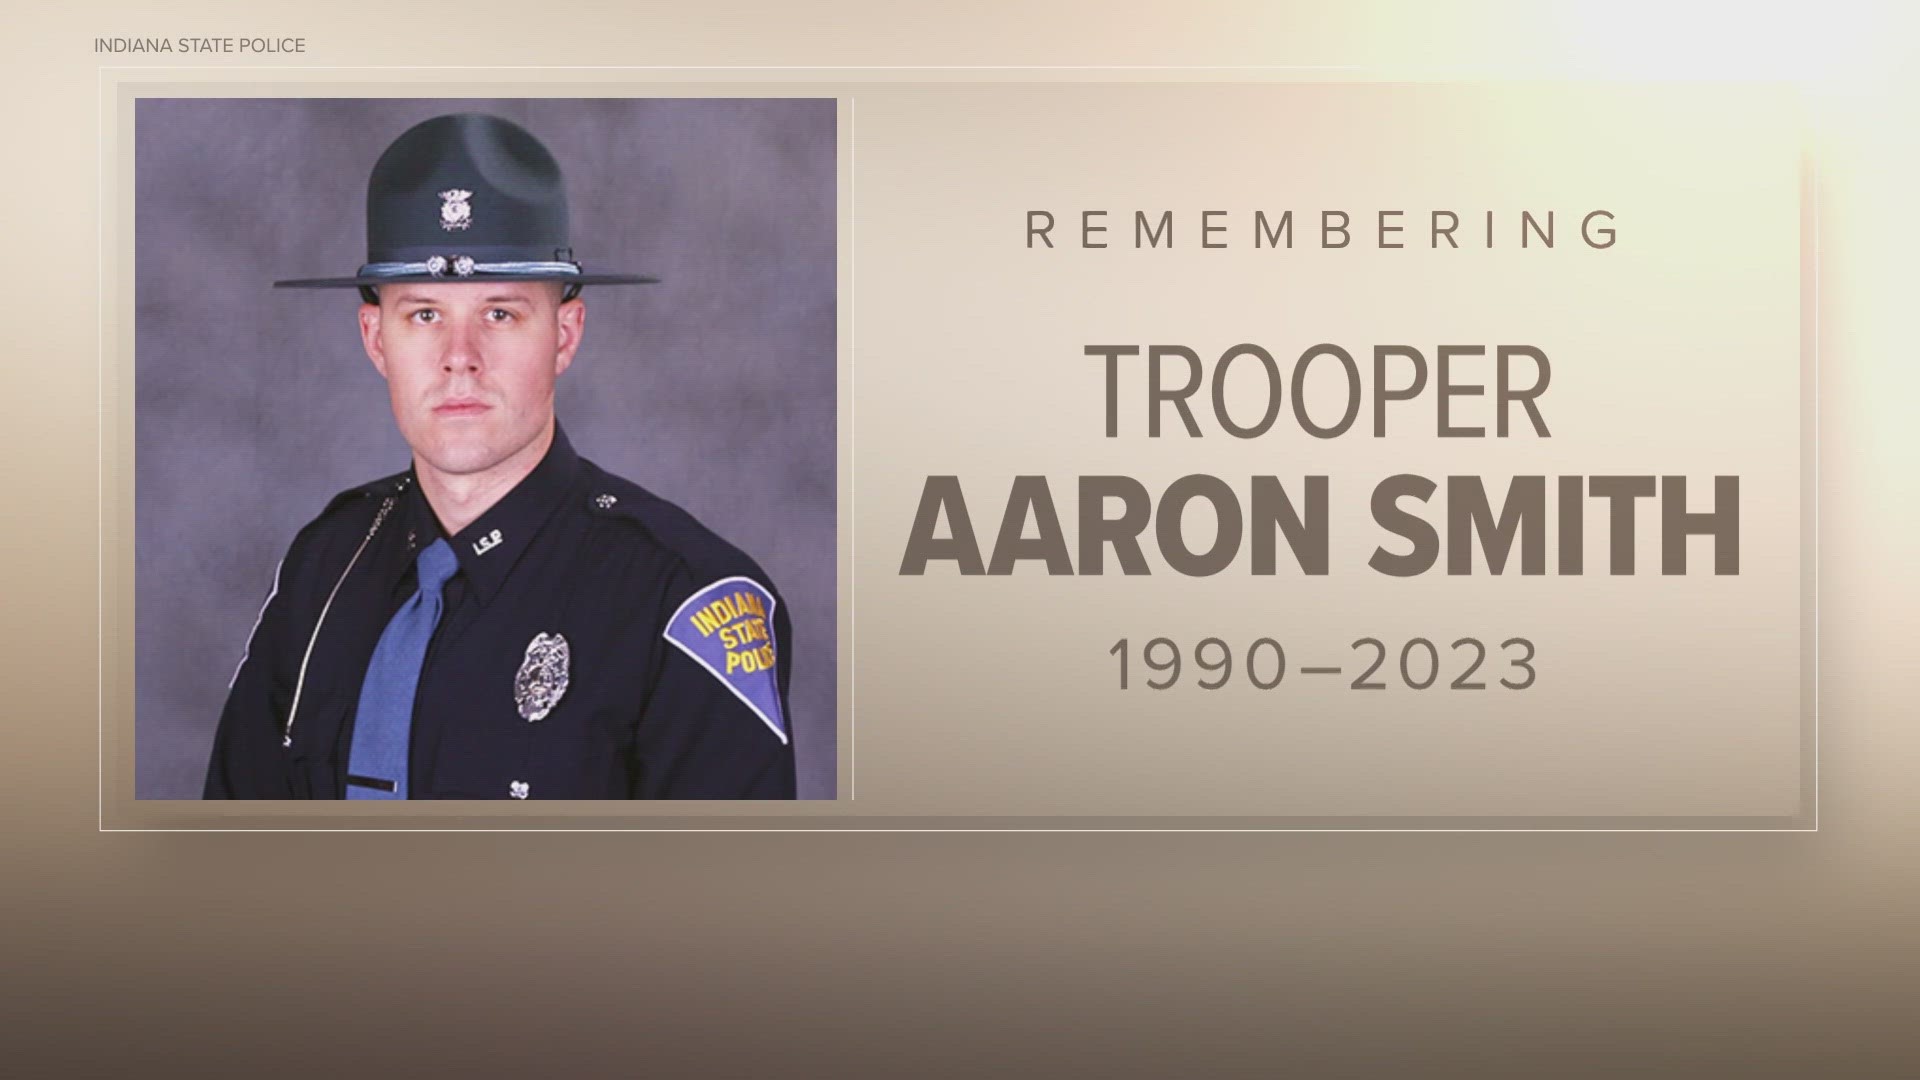 Friends, family, fellow law enforcement officers and the community are paying their respects to fallen ISP Trooper Aaron Smith.